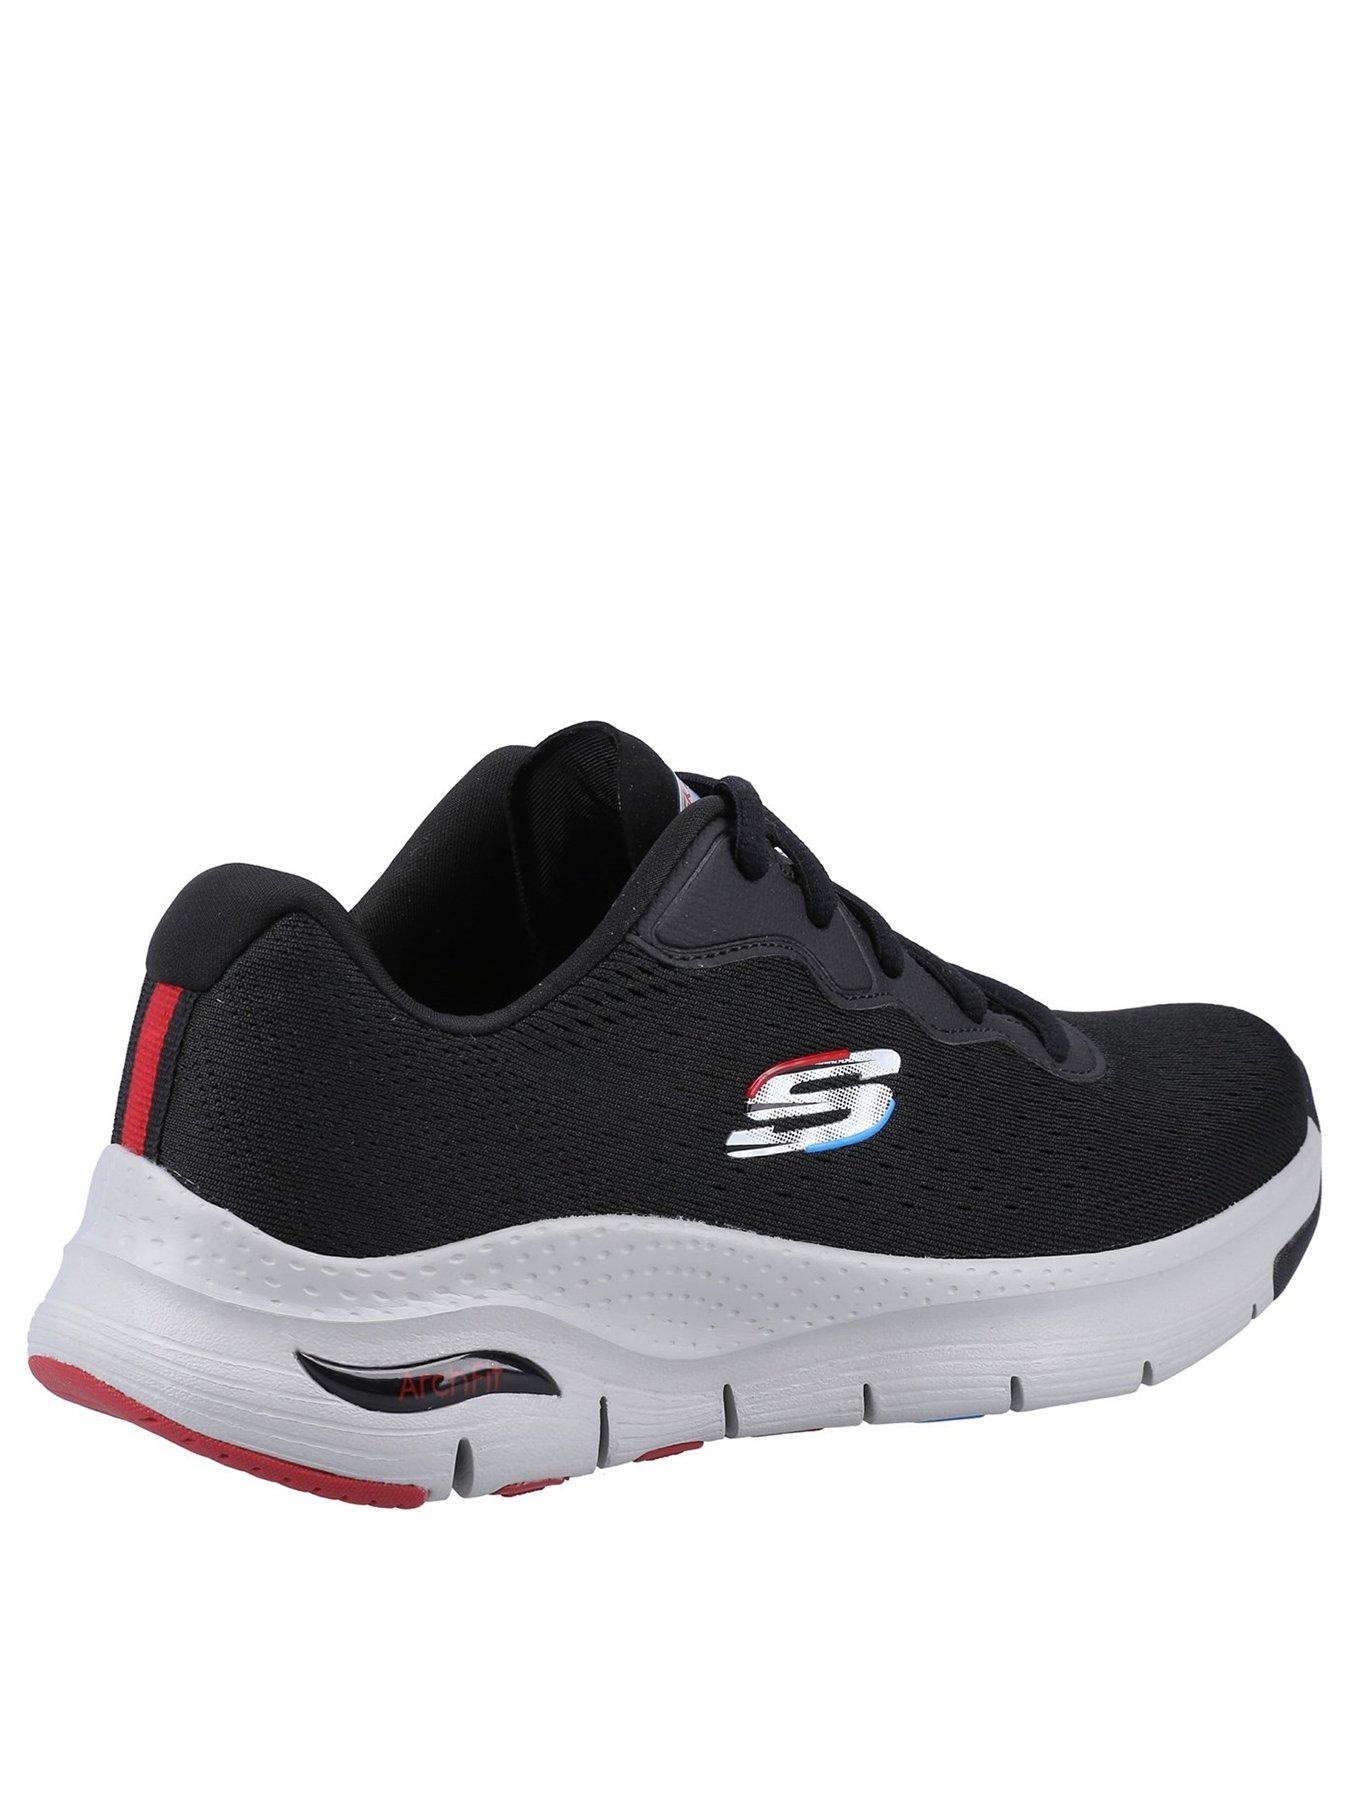 Skechers Air-cooled Arch Fit Vegan Trainer - Black | very.co.uk